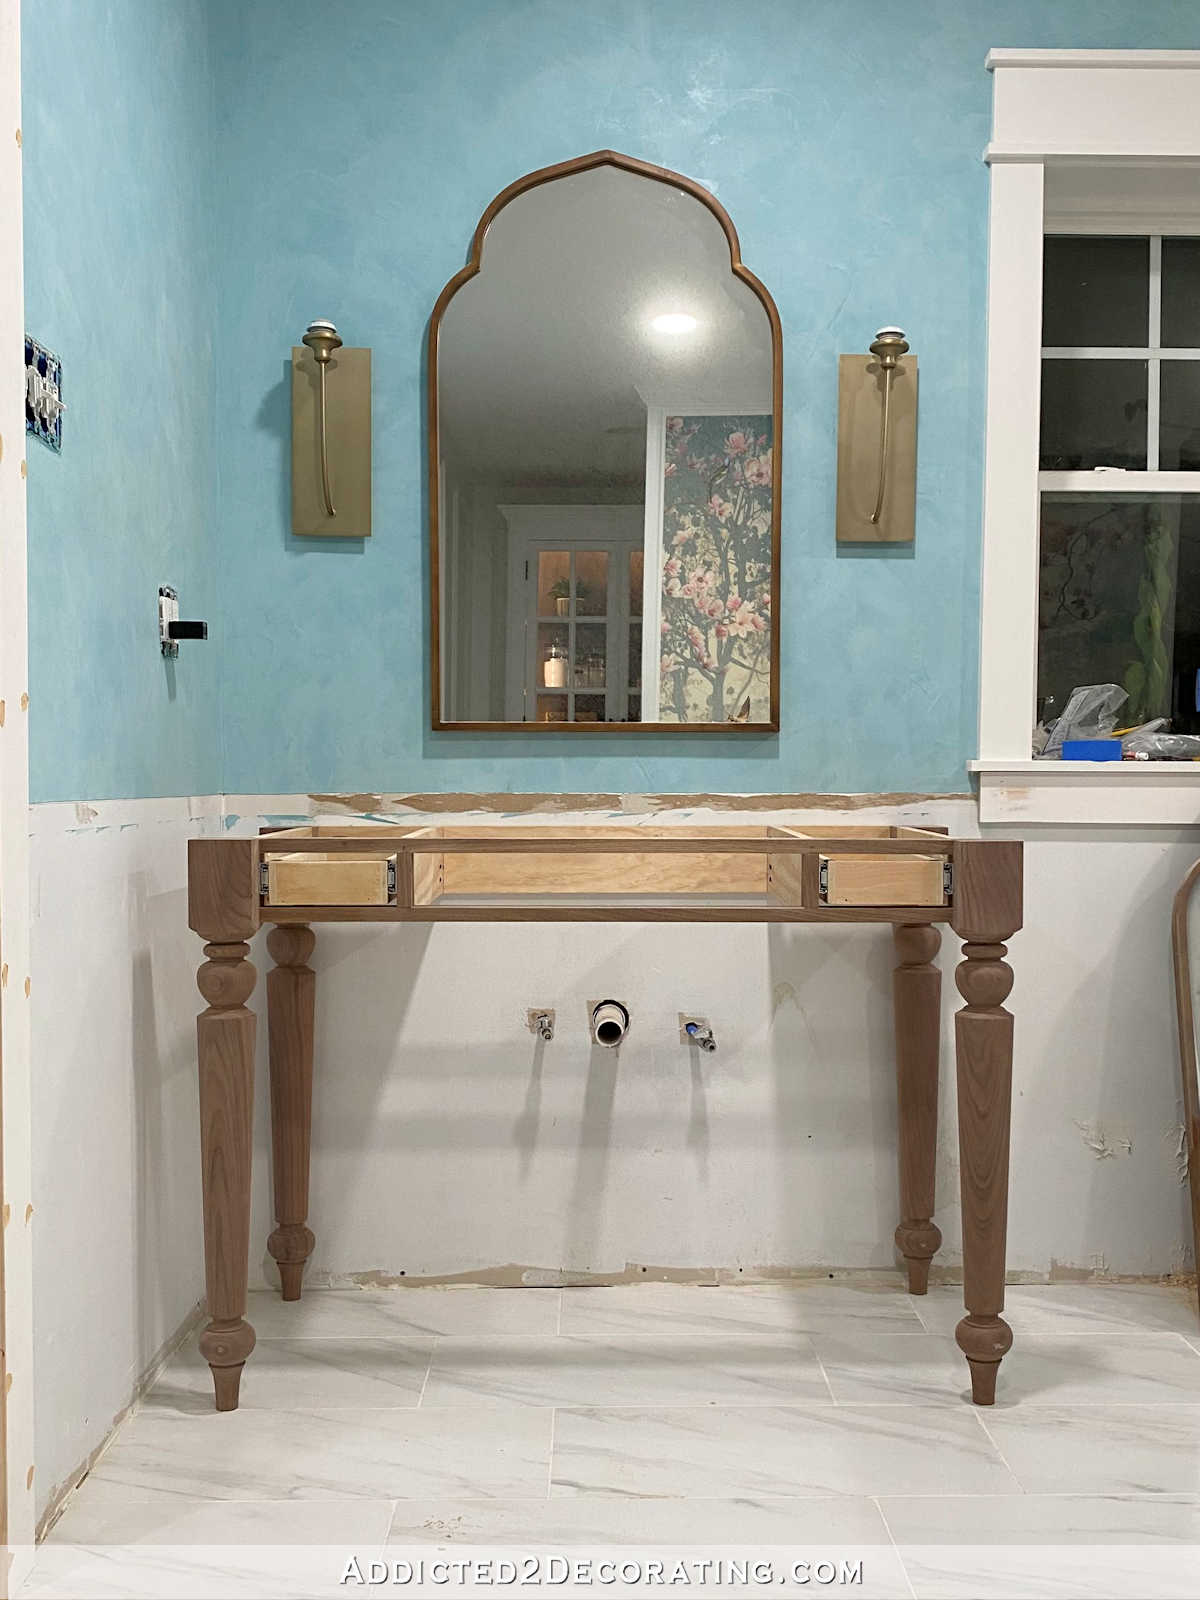 DIY Table-Style Bathroom Vanity With Drawers (Part 1 — The Basic Build)